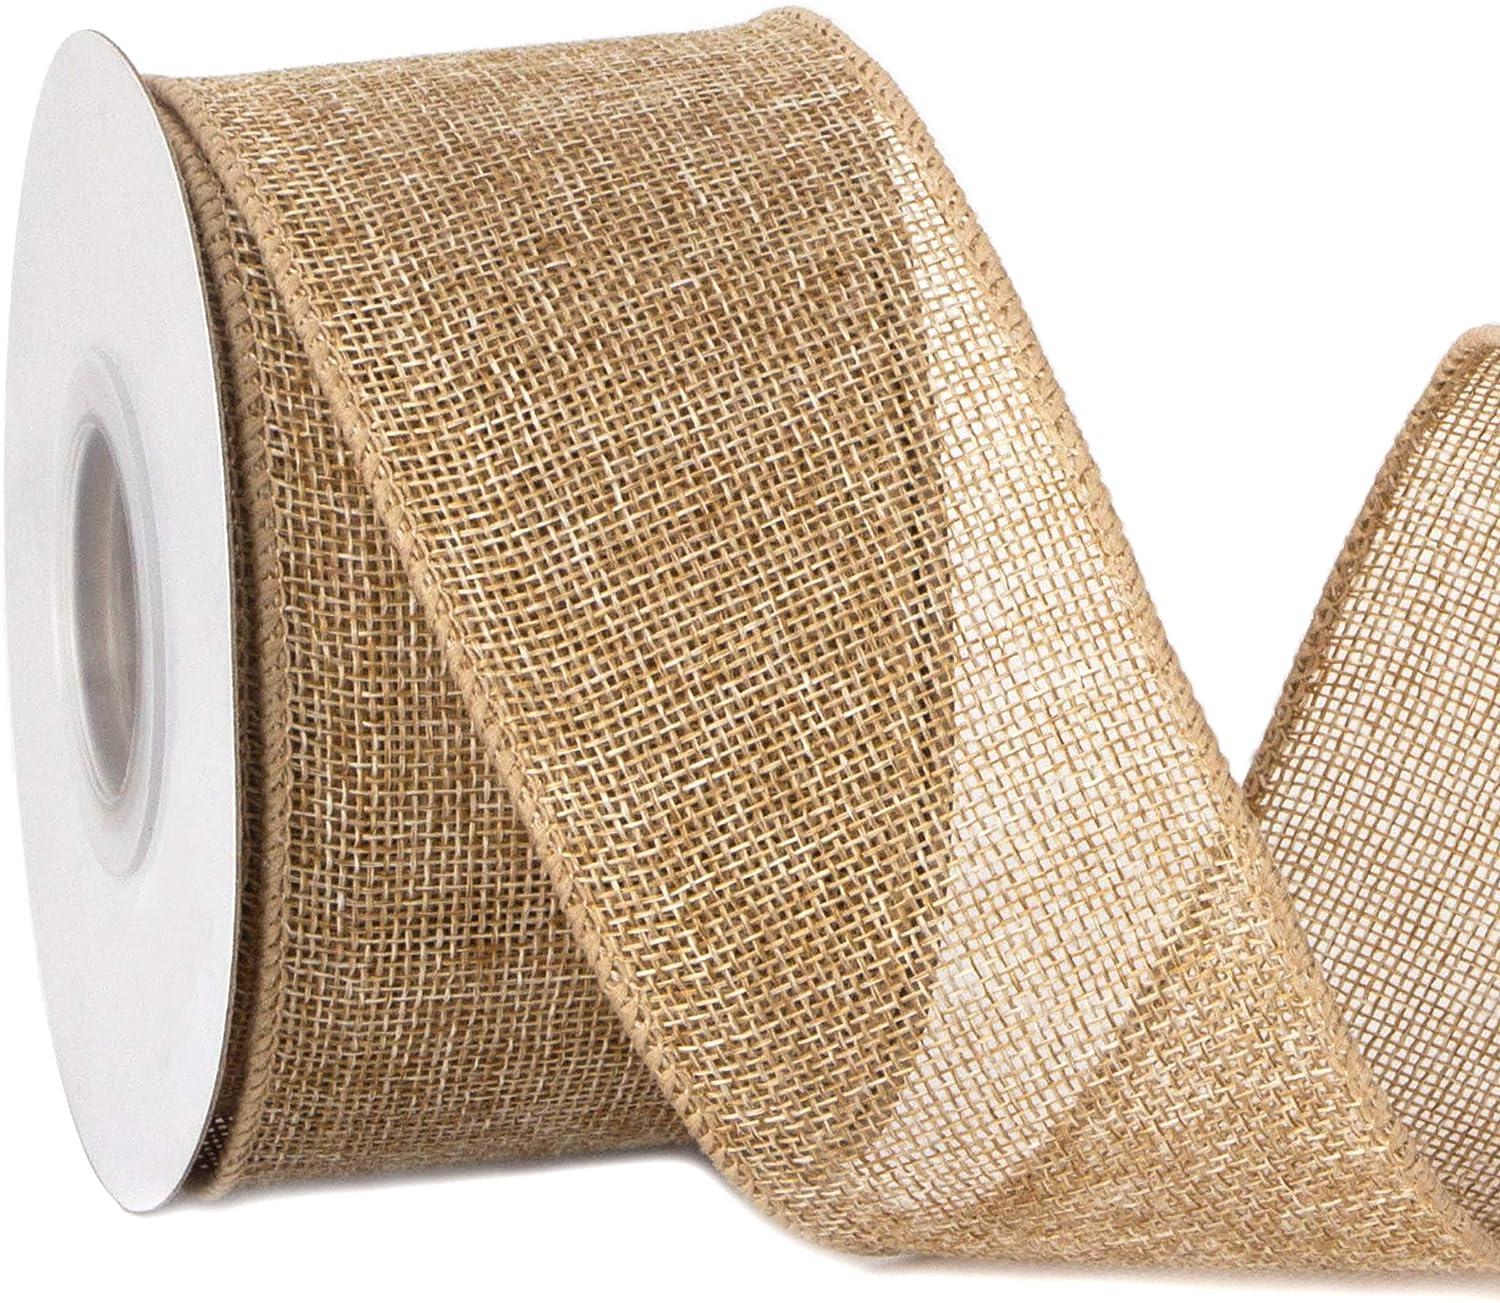 Ribbli Burlap Wired Ribbon,1-1/2 inch x 10 Yard,Natural,Solid Wired Edge Ribbon for Big Bow,Wreath,Tree Decoration,Outdoor Decoration